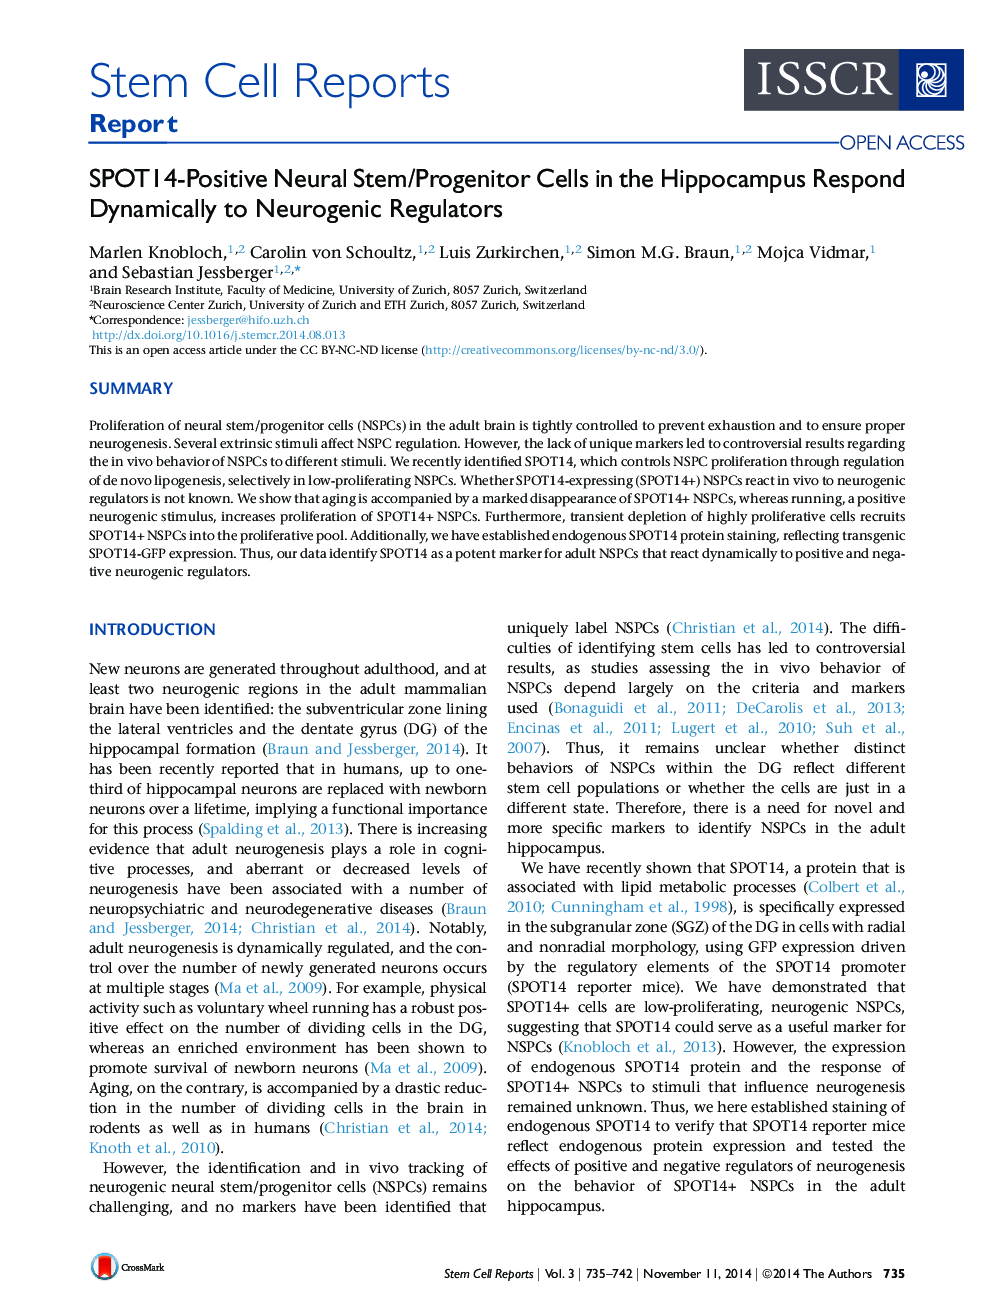 SPOT14-Positive Neural Stem/Progenitor Cells in the Hippocampus Respond Dynamically to Neurogenic Regulators 